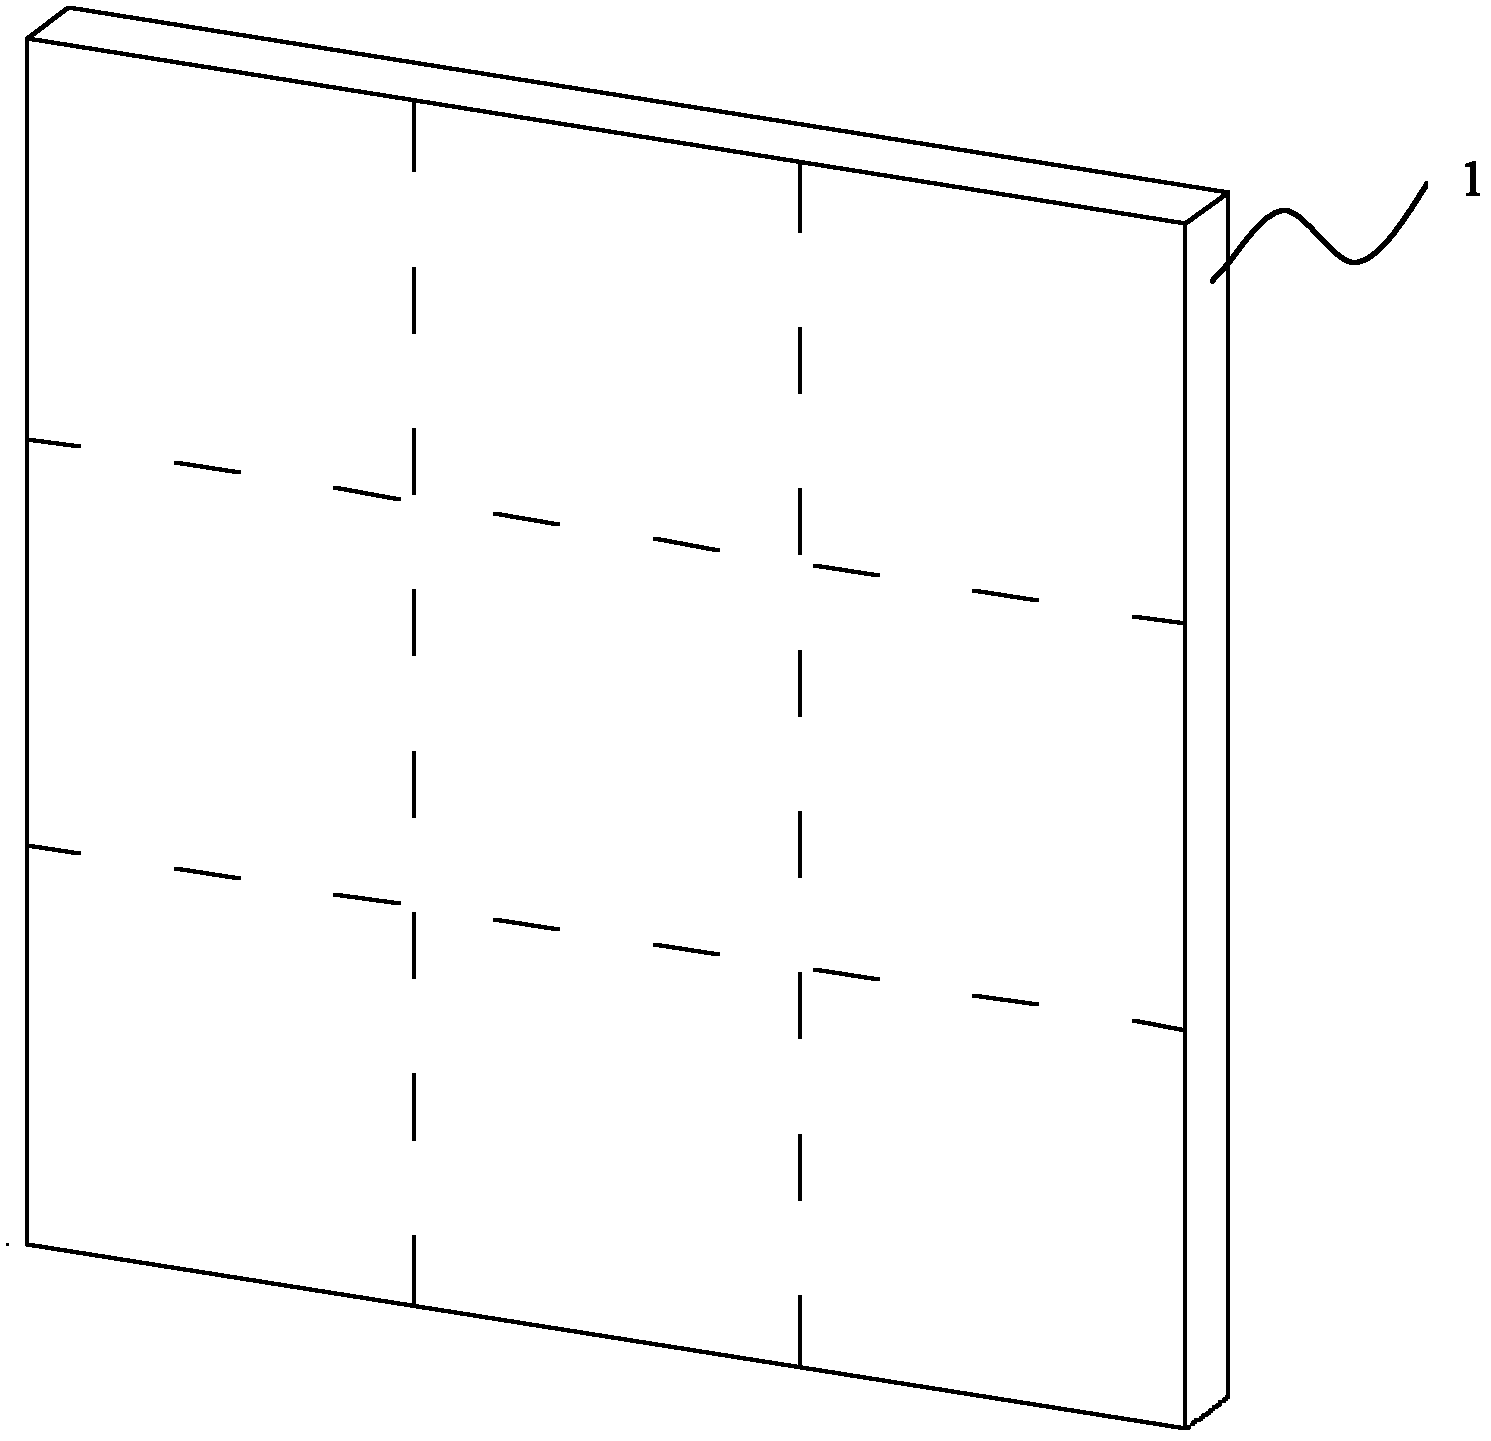 Metamaterial microwave antenna cover and antenna system